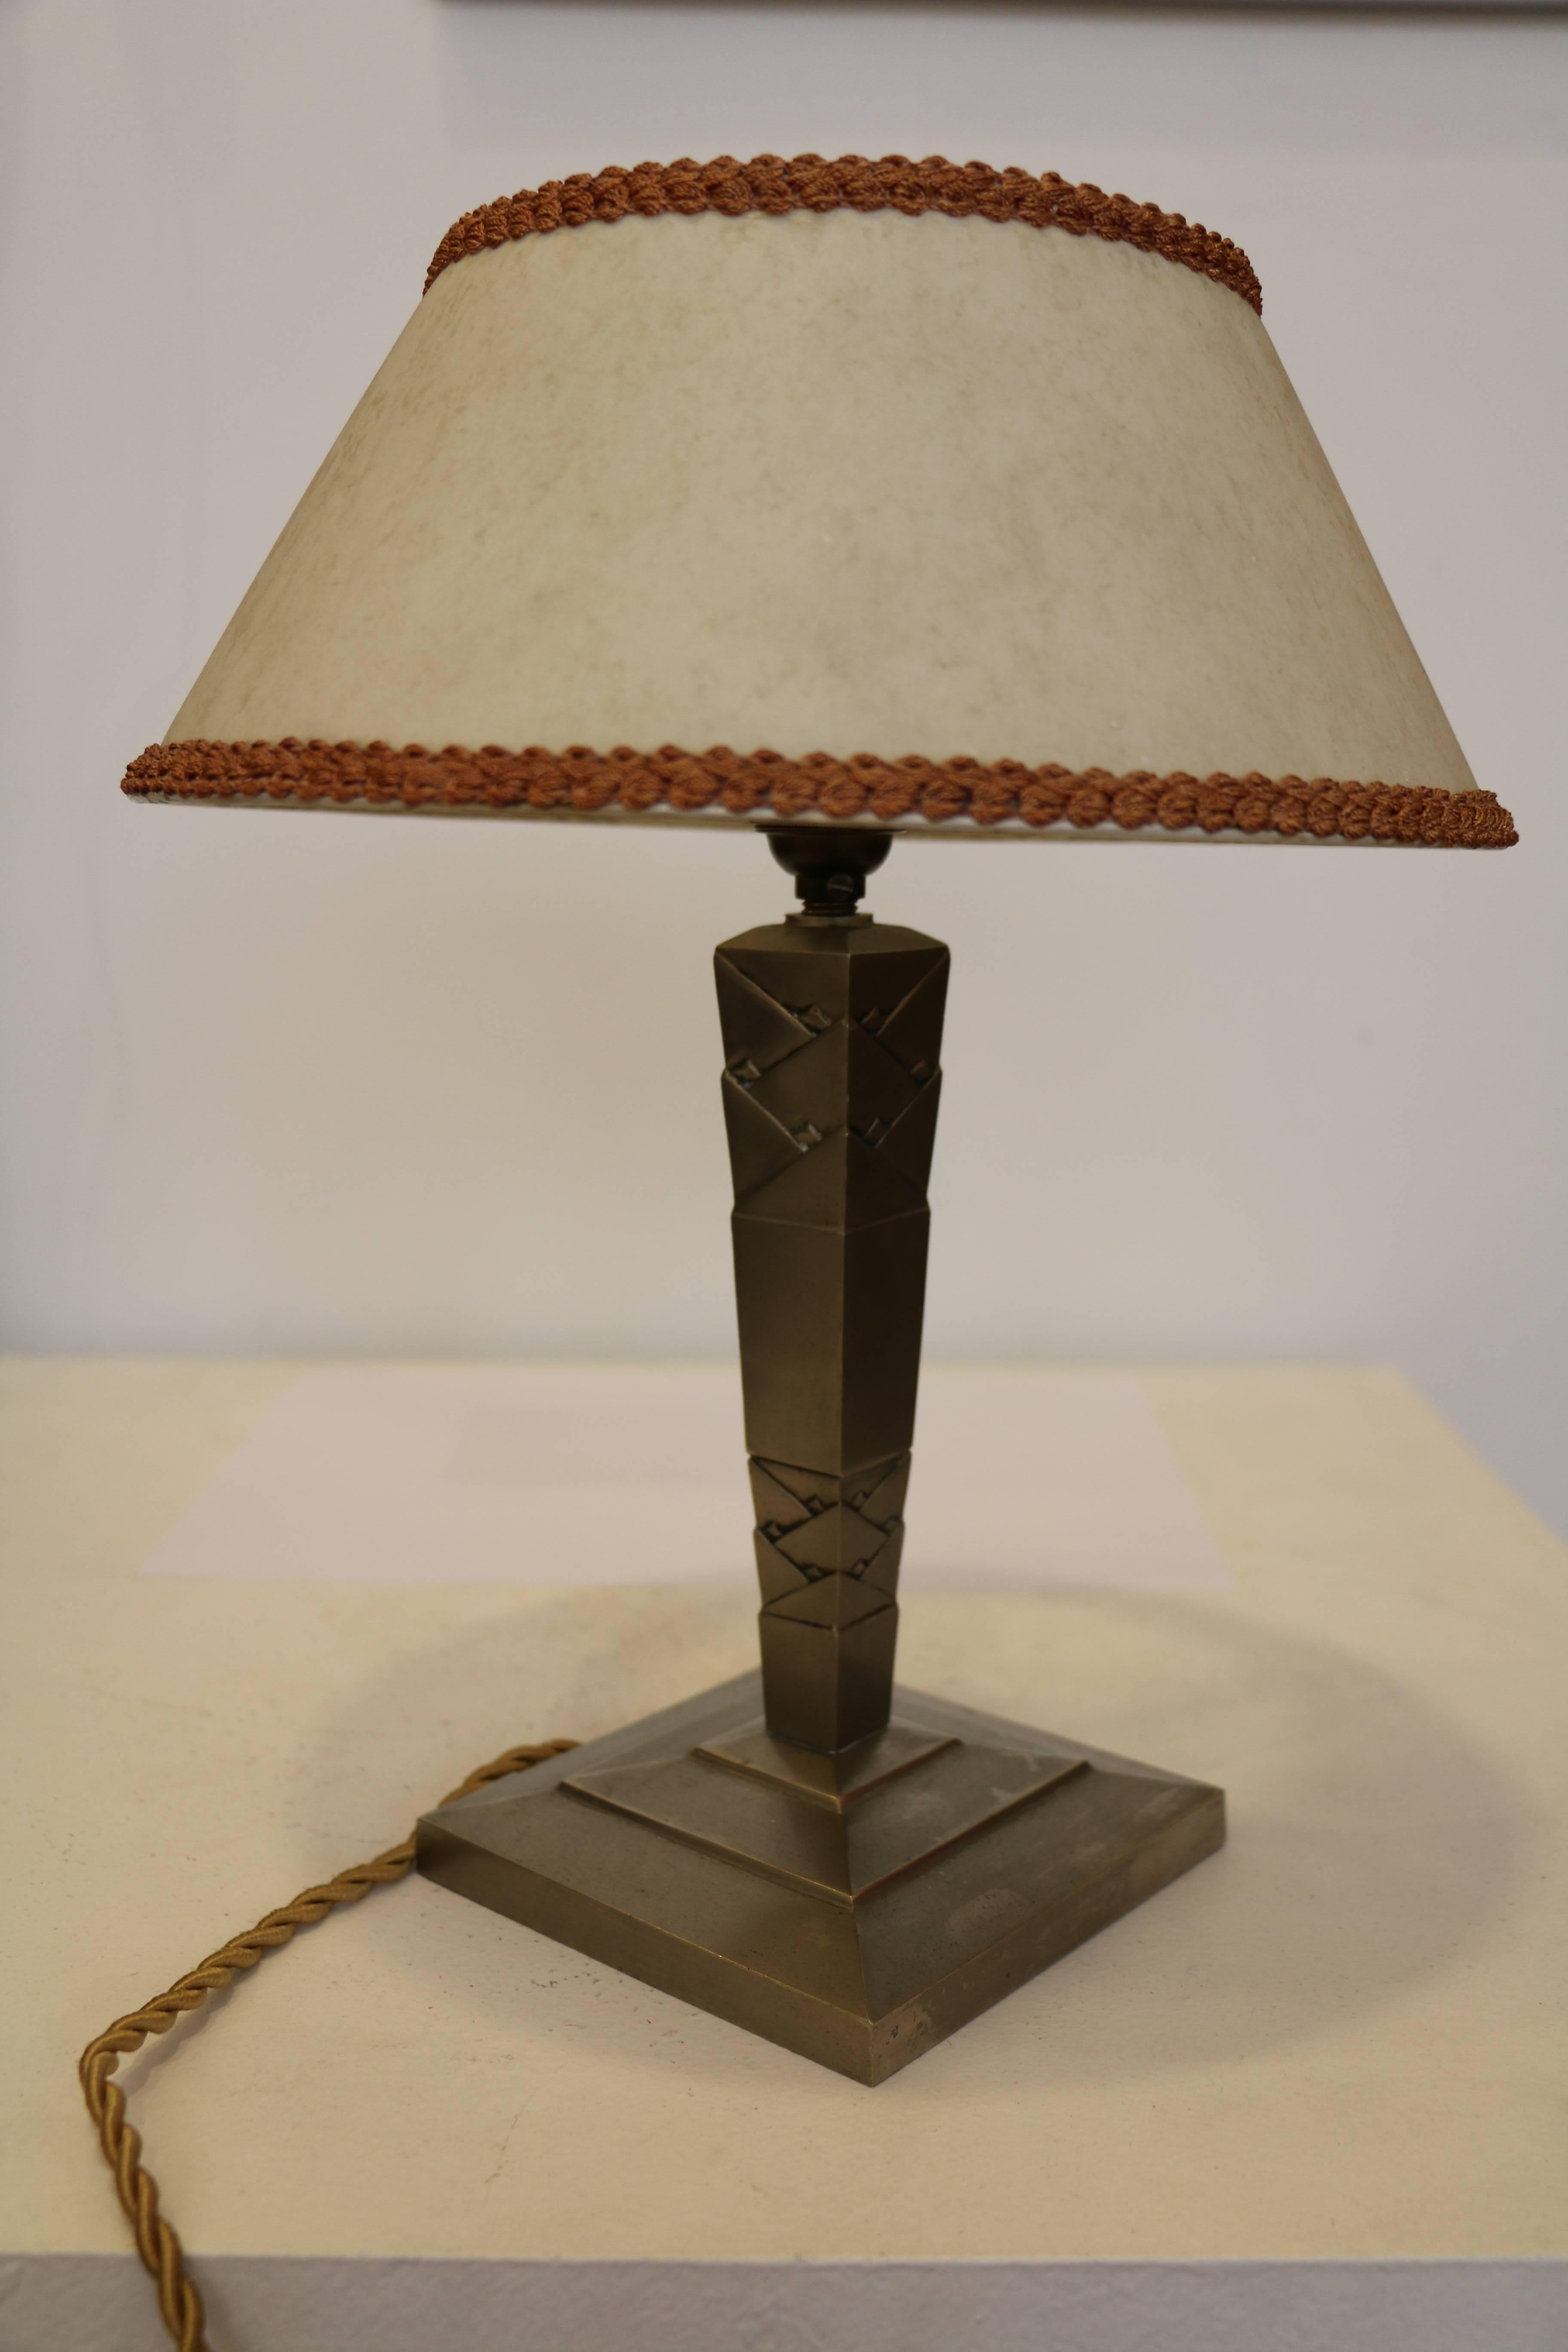 Nickel-plated table lamp by Edgar Brandt (1880-1960), 1925-1930.
Signed on the base: 